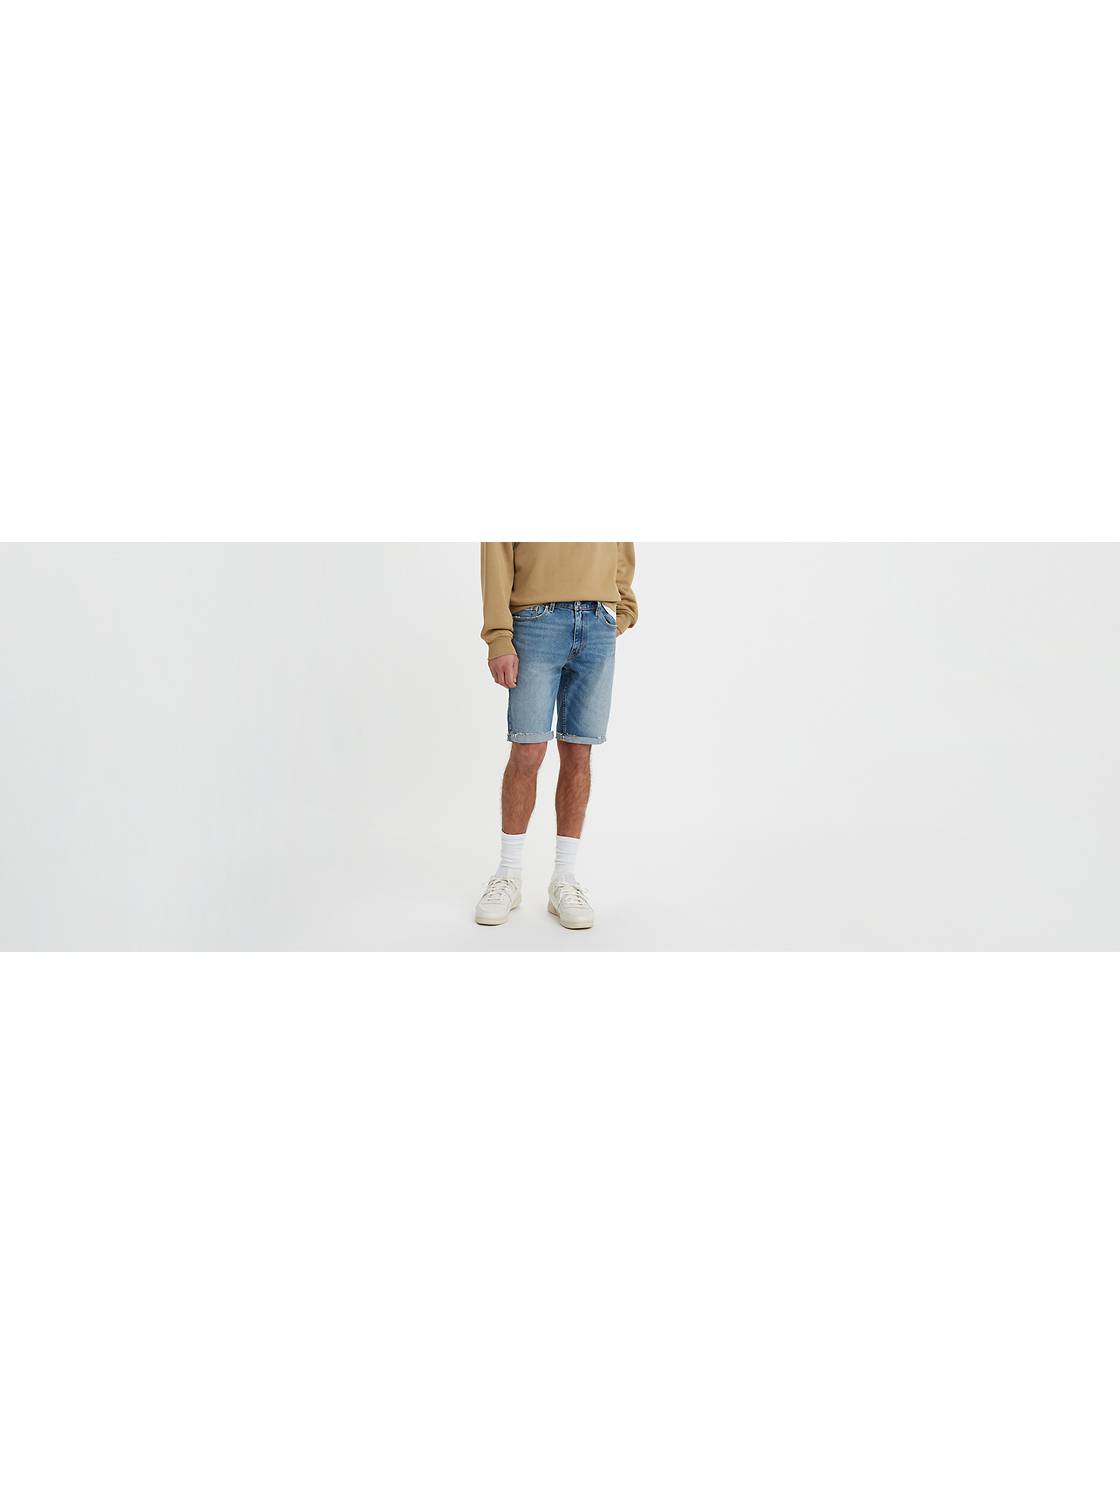 Shorts For Men - Cargo, Jean, Chino & More | Levi's® US